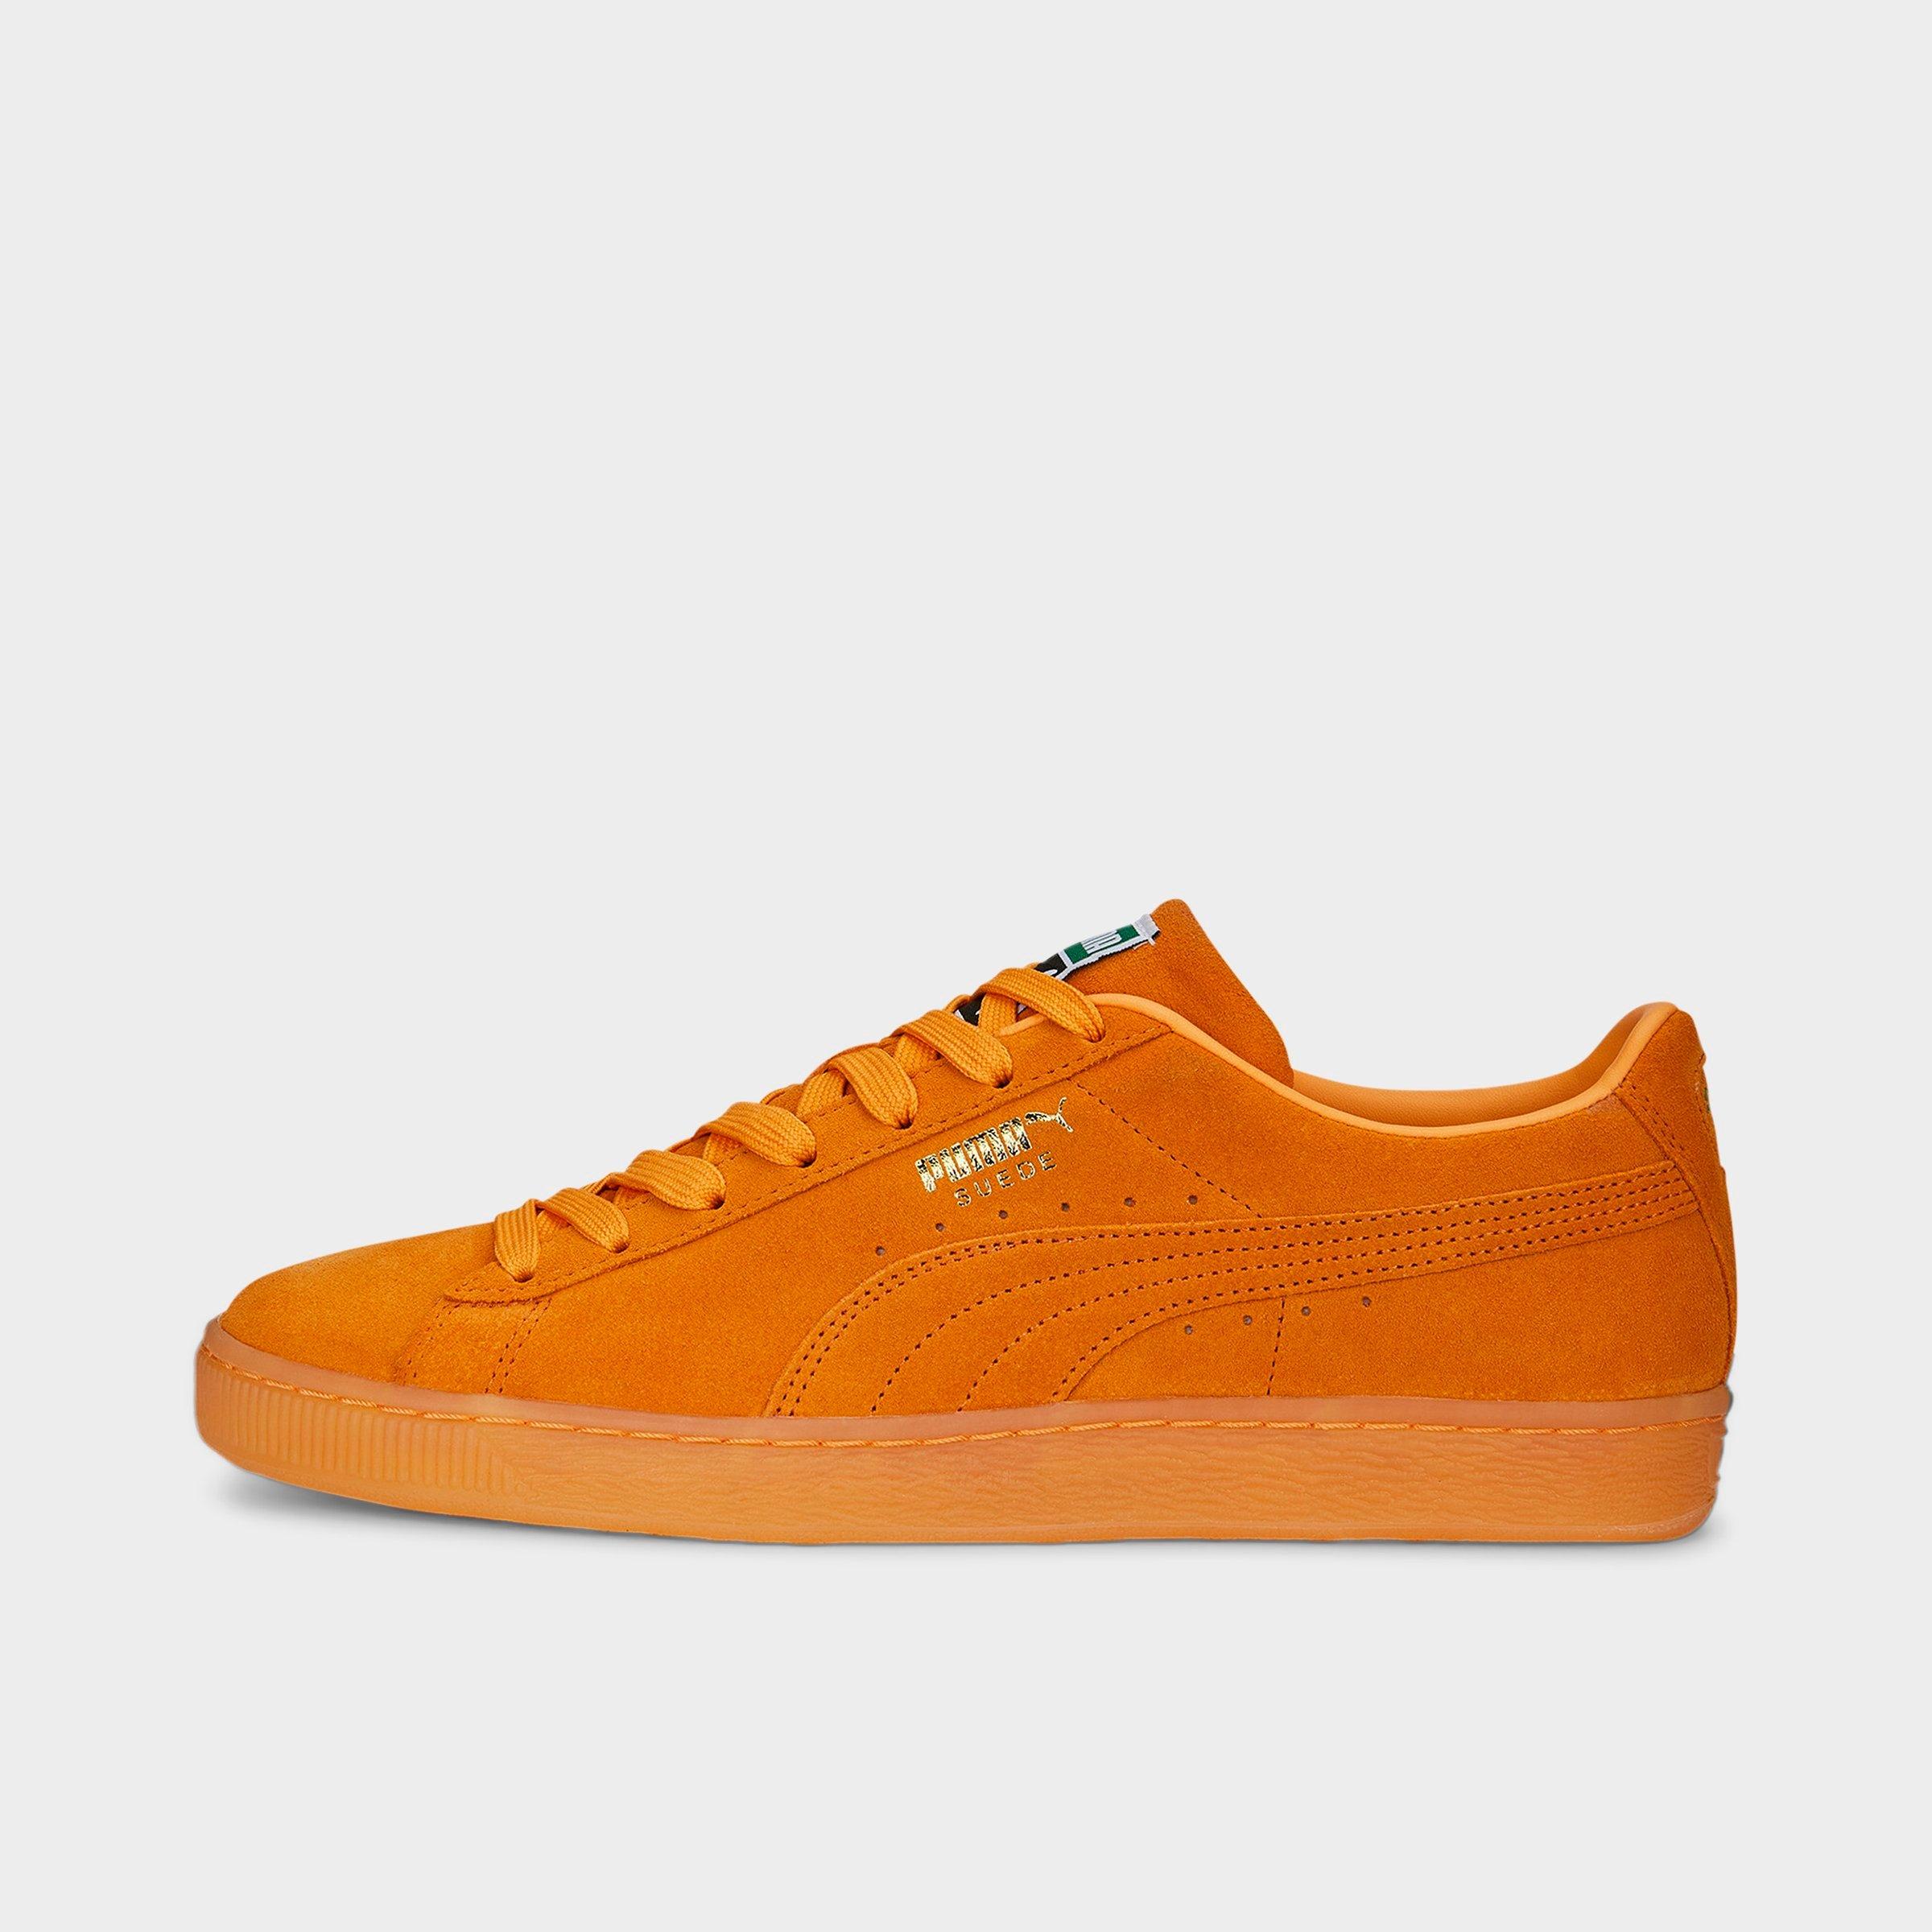 Puma Suede Classic 21 Casual Shoes In Clementine/clementine